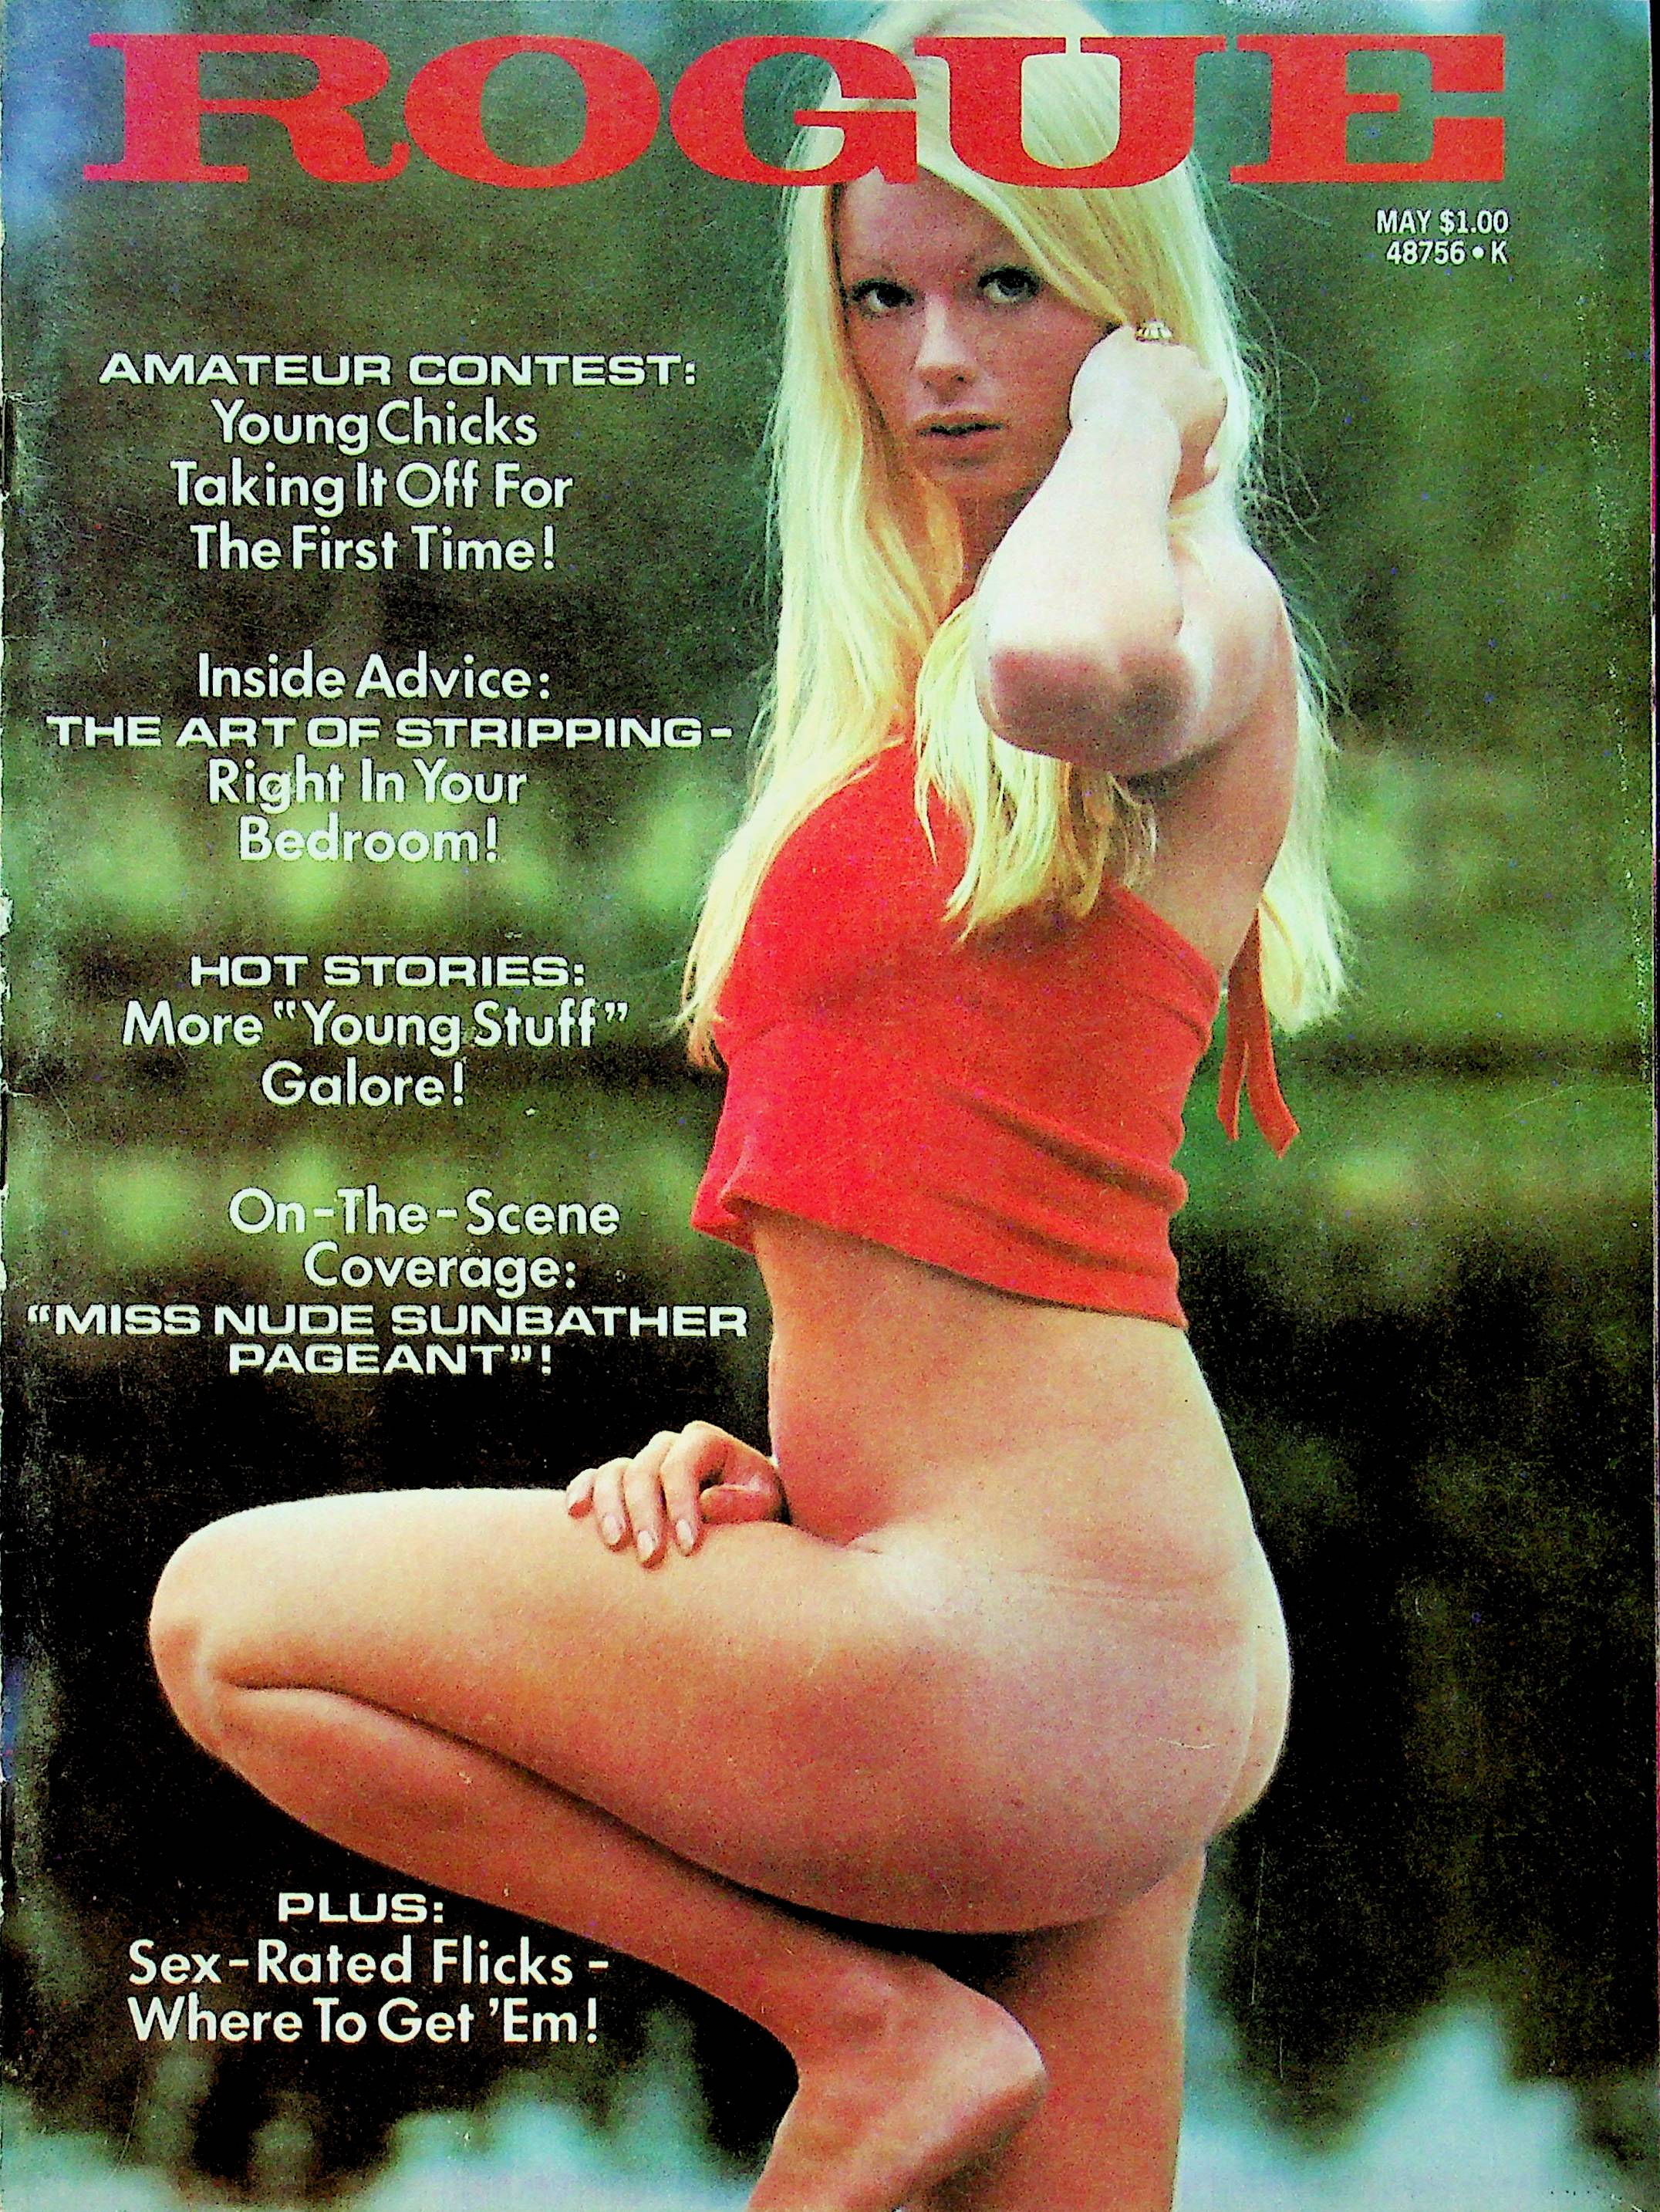 Rogue Adult Magazine Miss Nude Sunbather Pageant Bunny and Bev May 1973 image